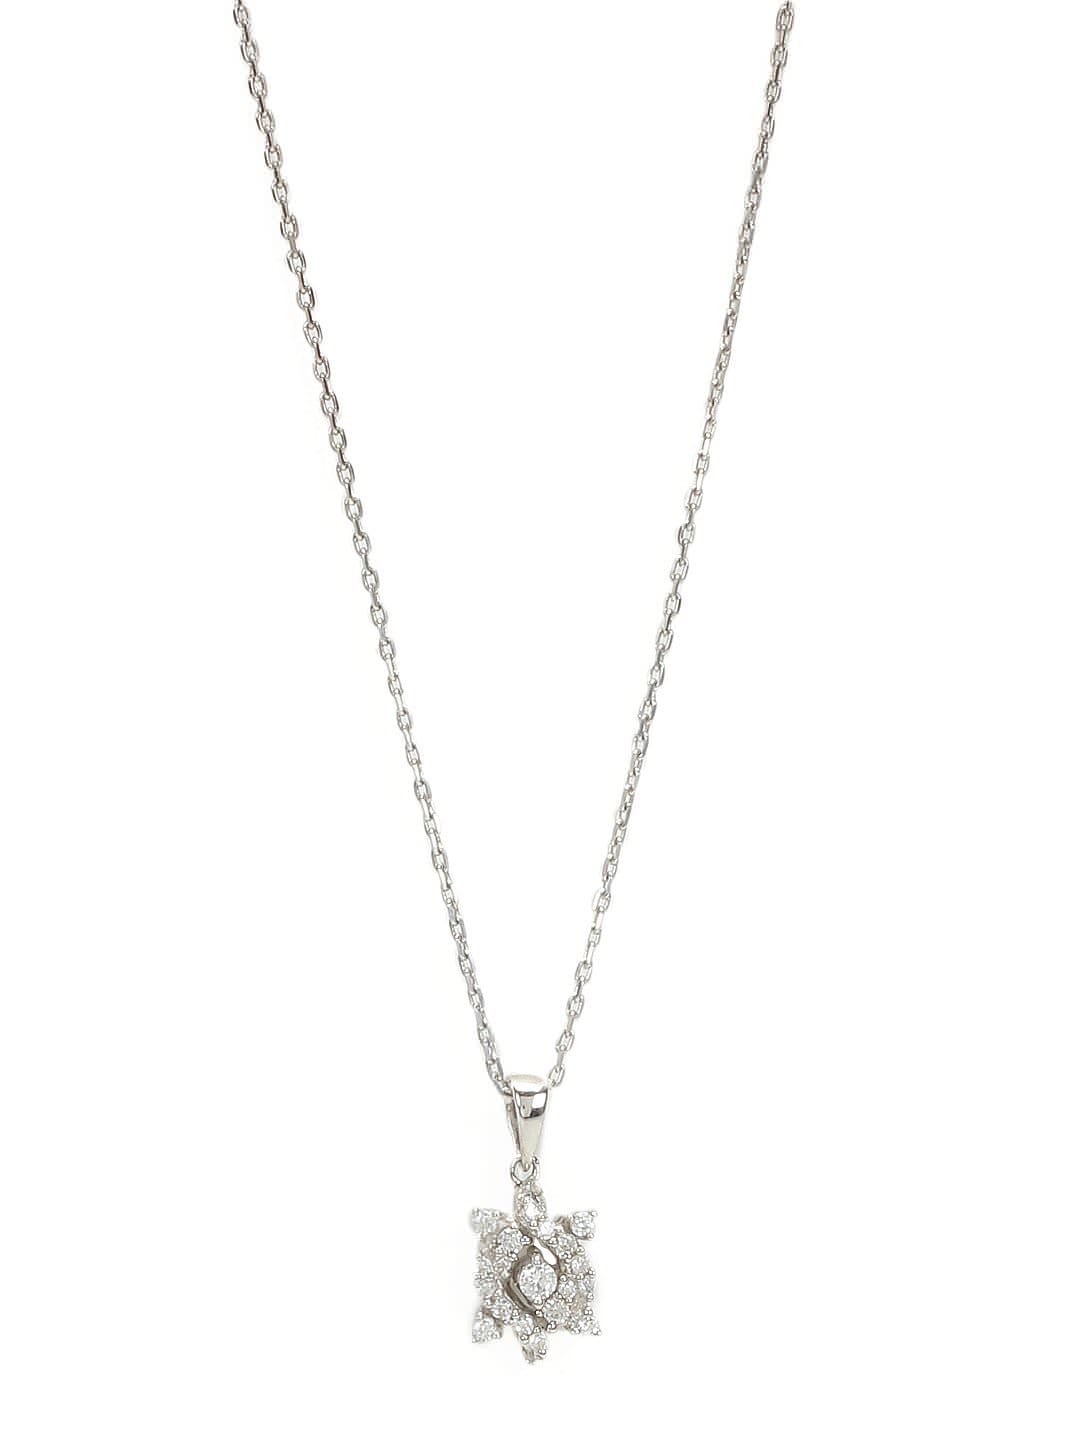 Lucera Silver Pendant With Chain